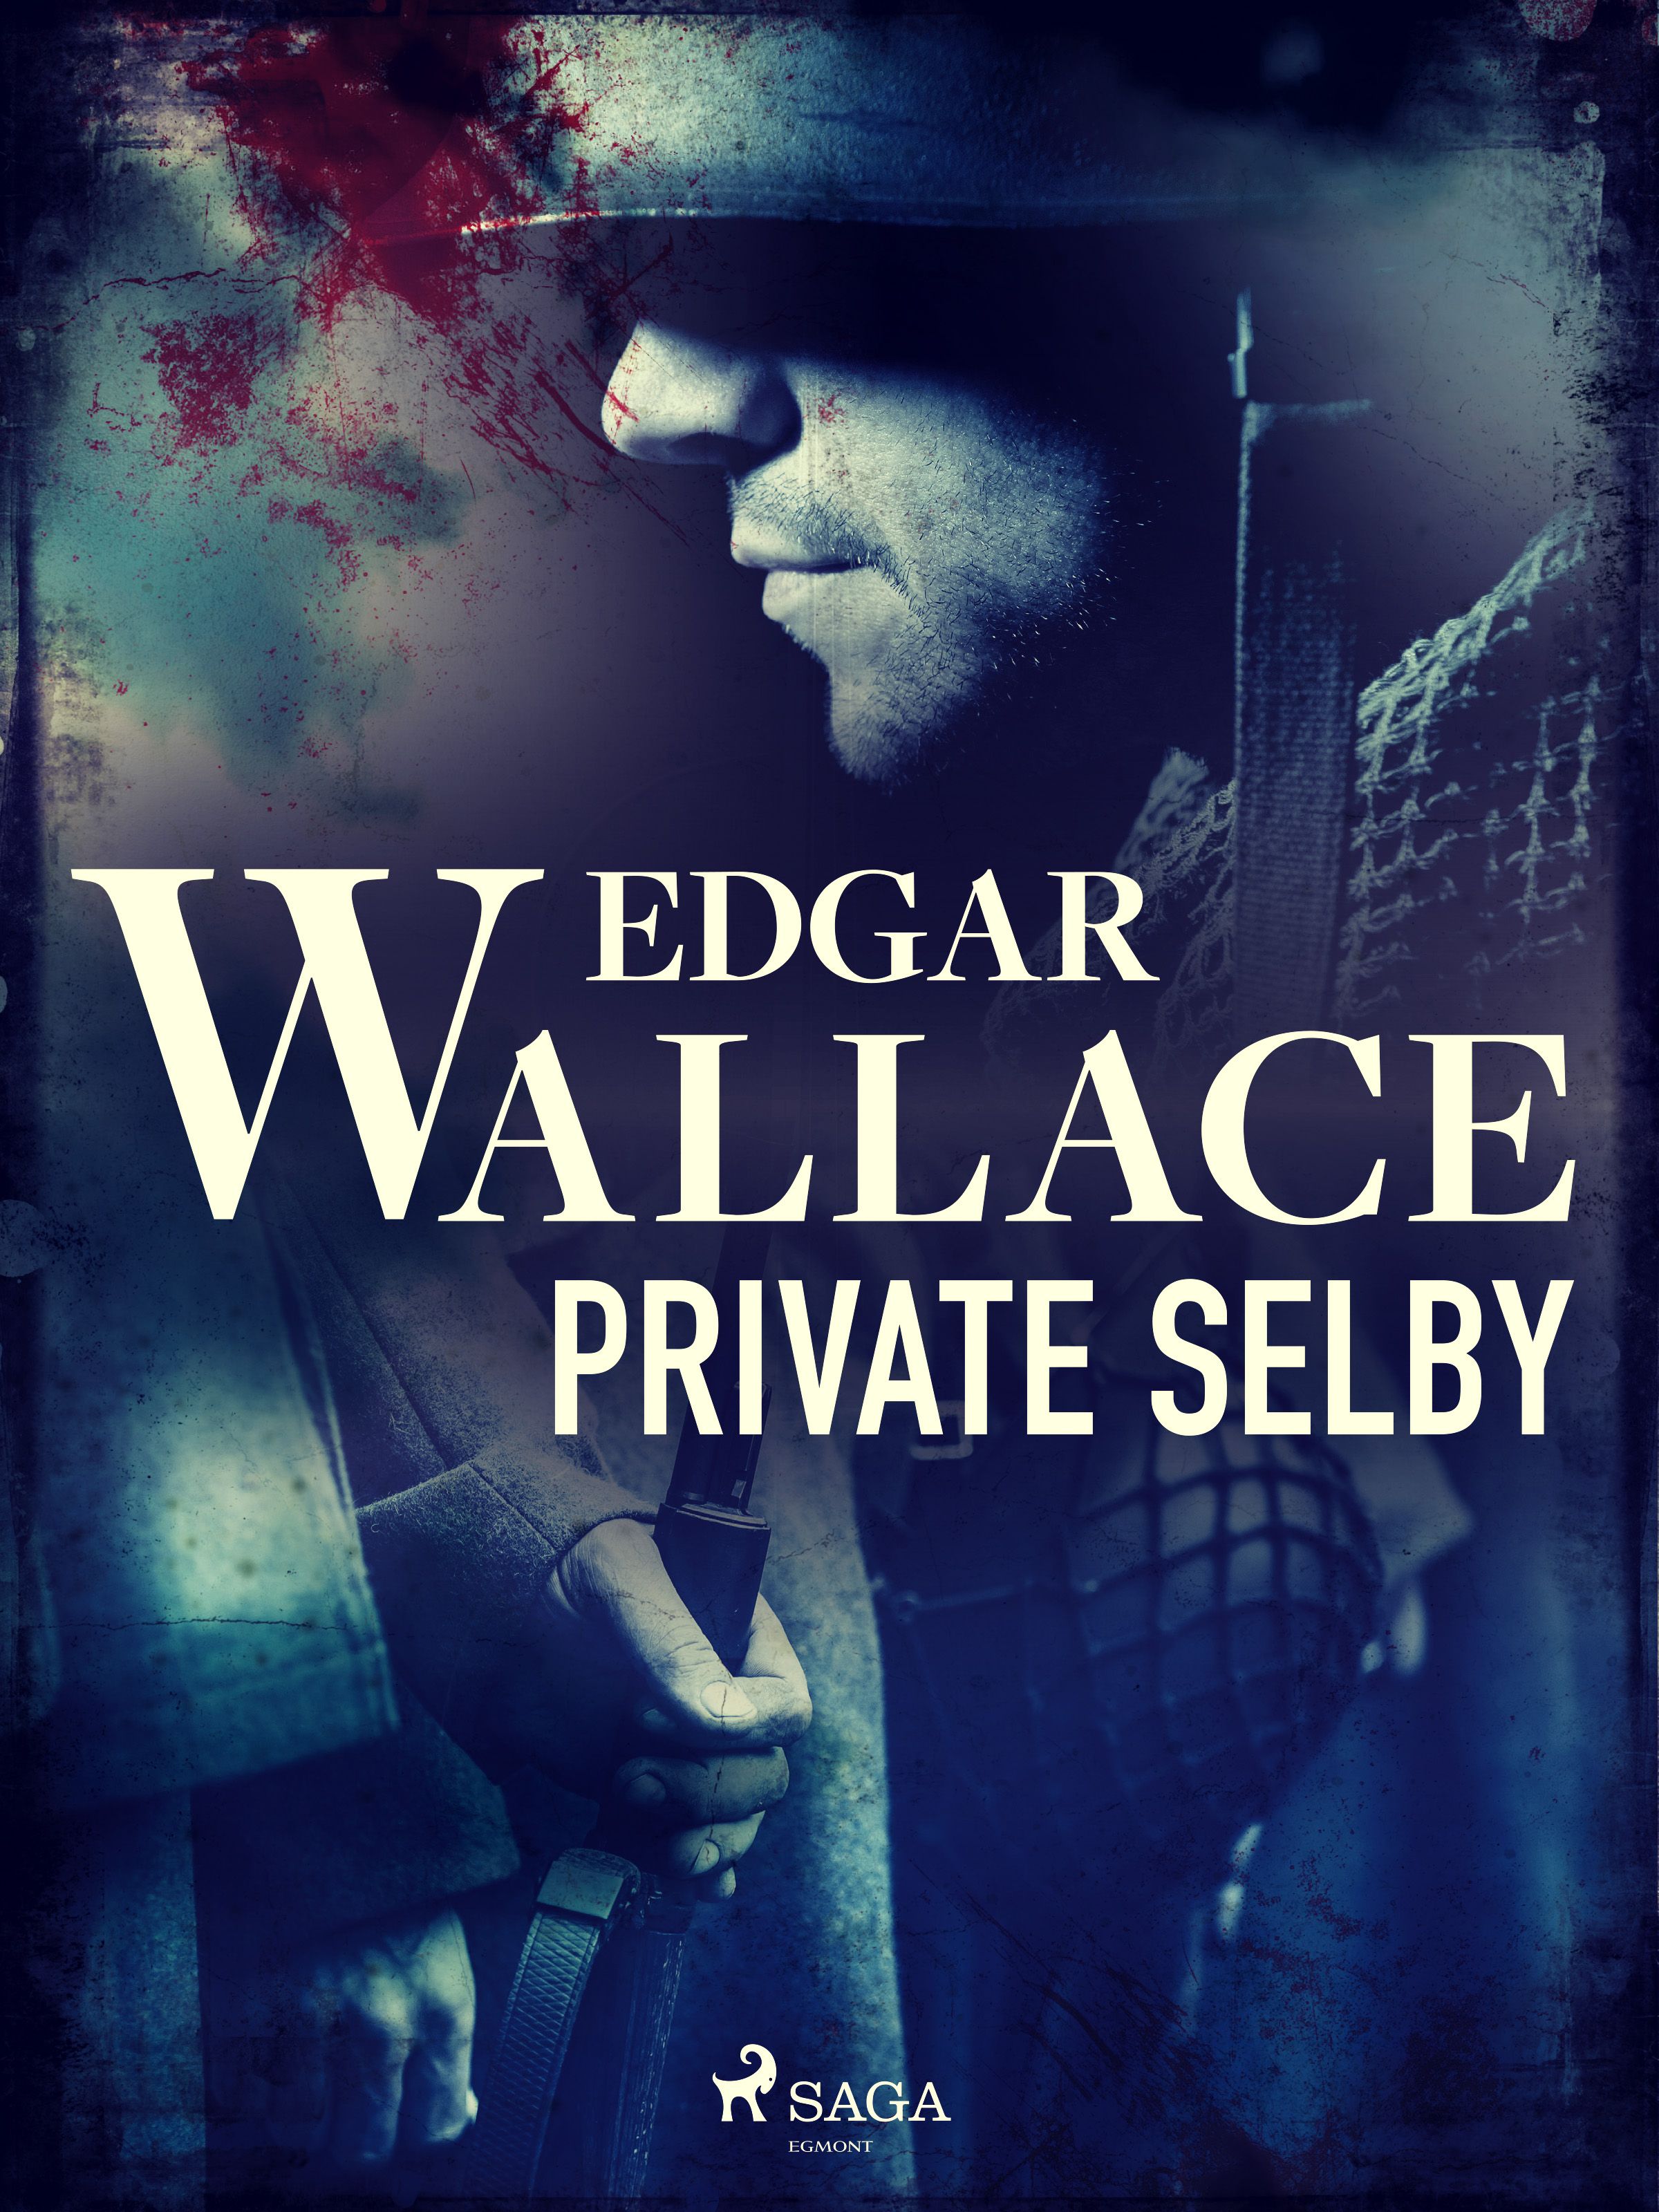 Private Selby, eBook by Edgar Wallace